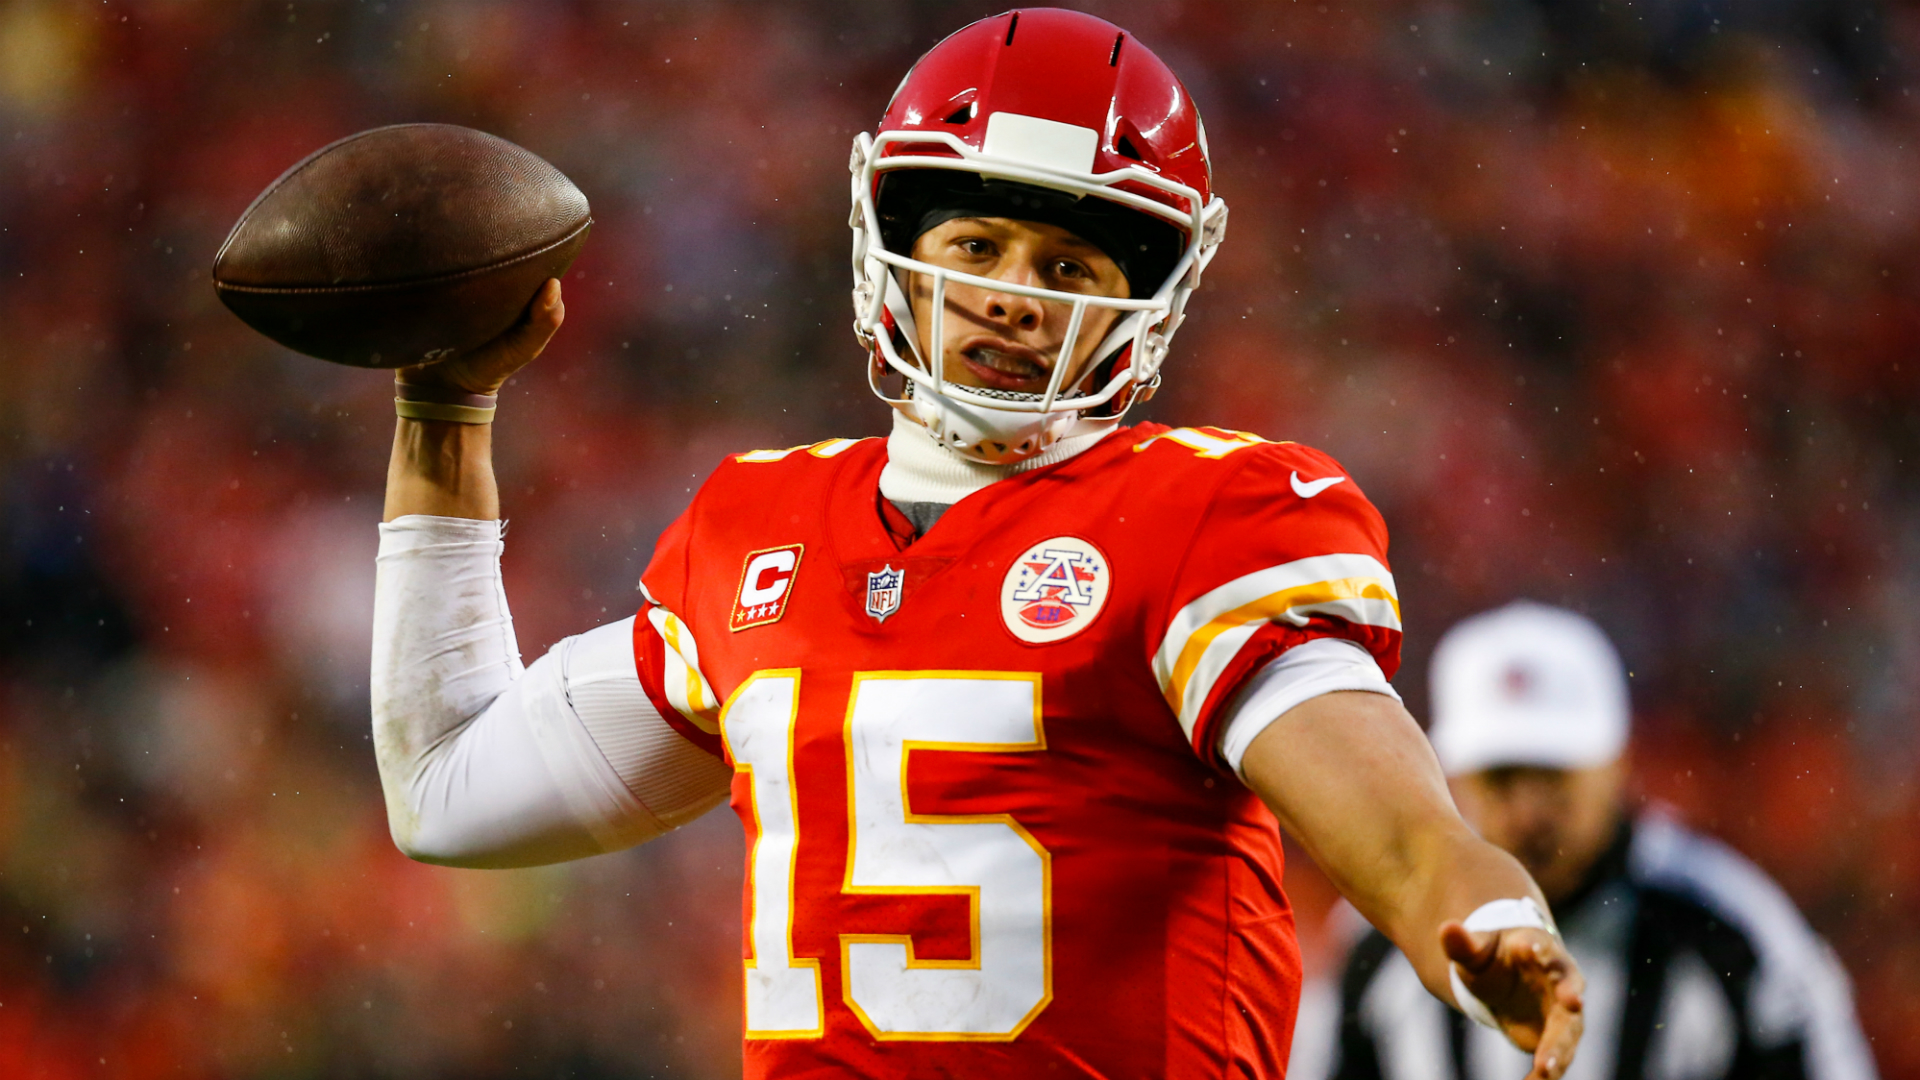 Patrick Mahomes plays 1 drive instead of 1 quarter after